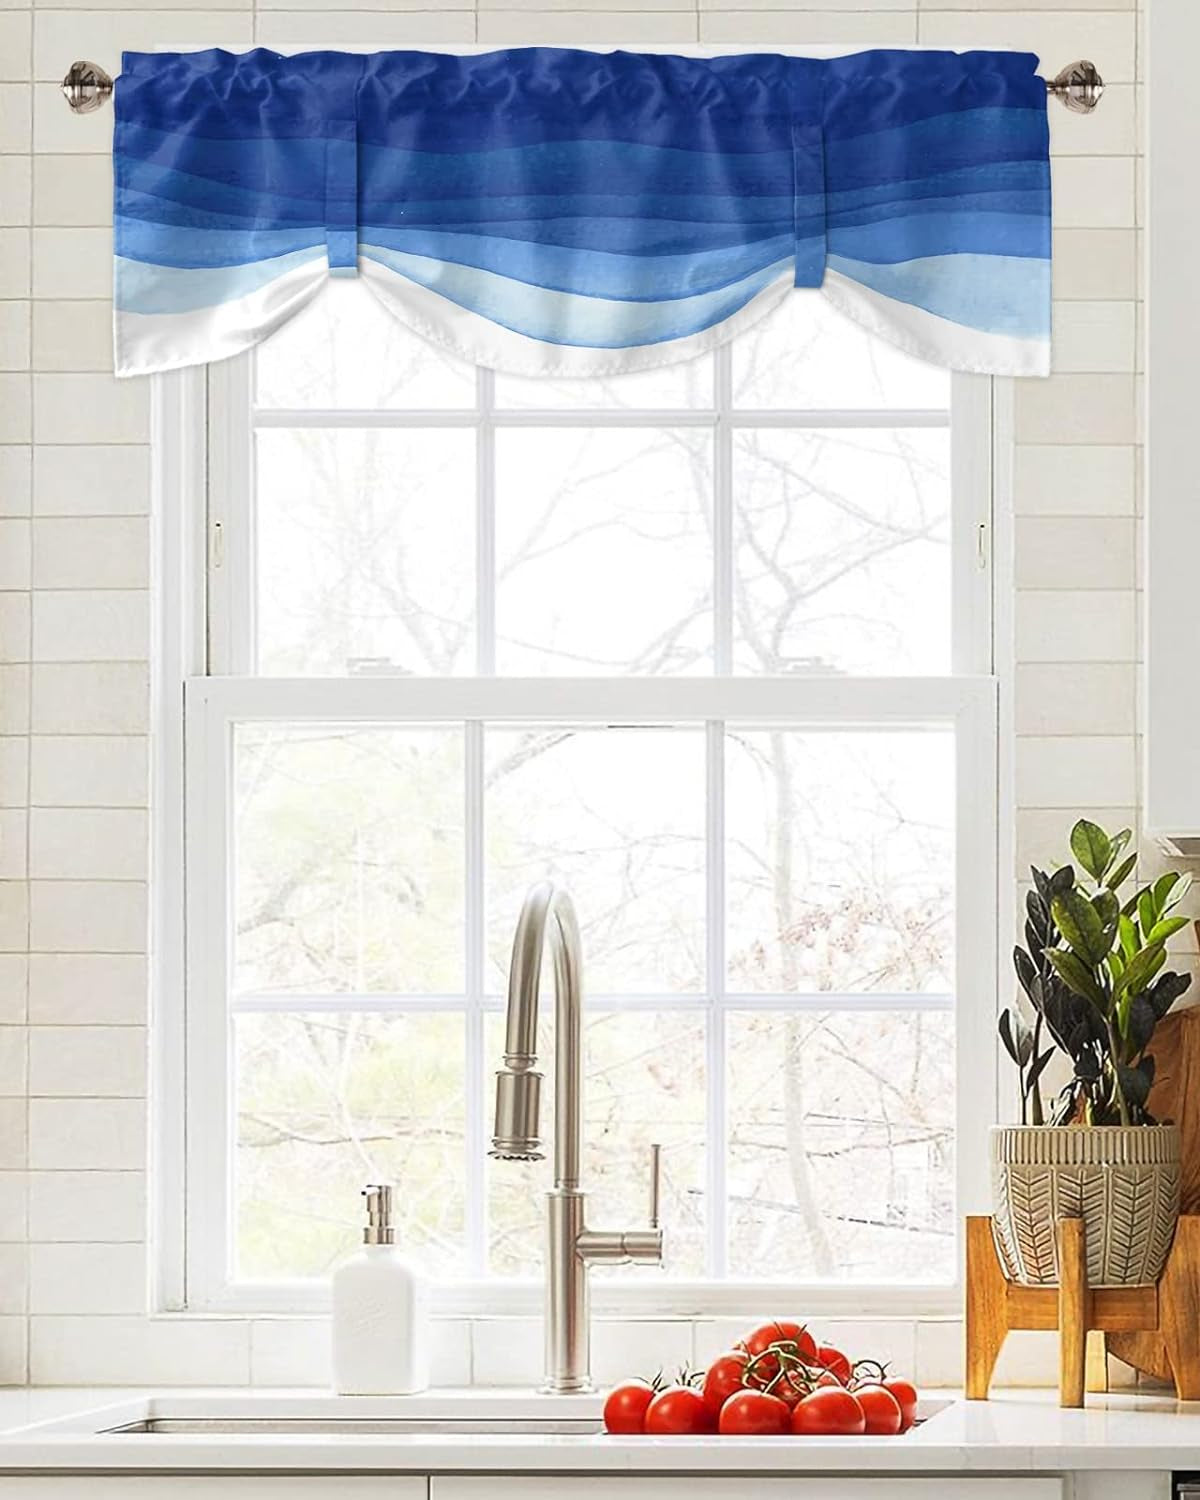 Ombre Tie up Valance Curtains, Gradient Royal Blue to White Watercolor Style Window Valance for Kitchen Cafe Bathroom Rod Pocket Window Treatment Valances 54 X 18Inch, 1 Panel